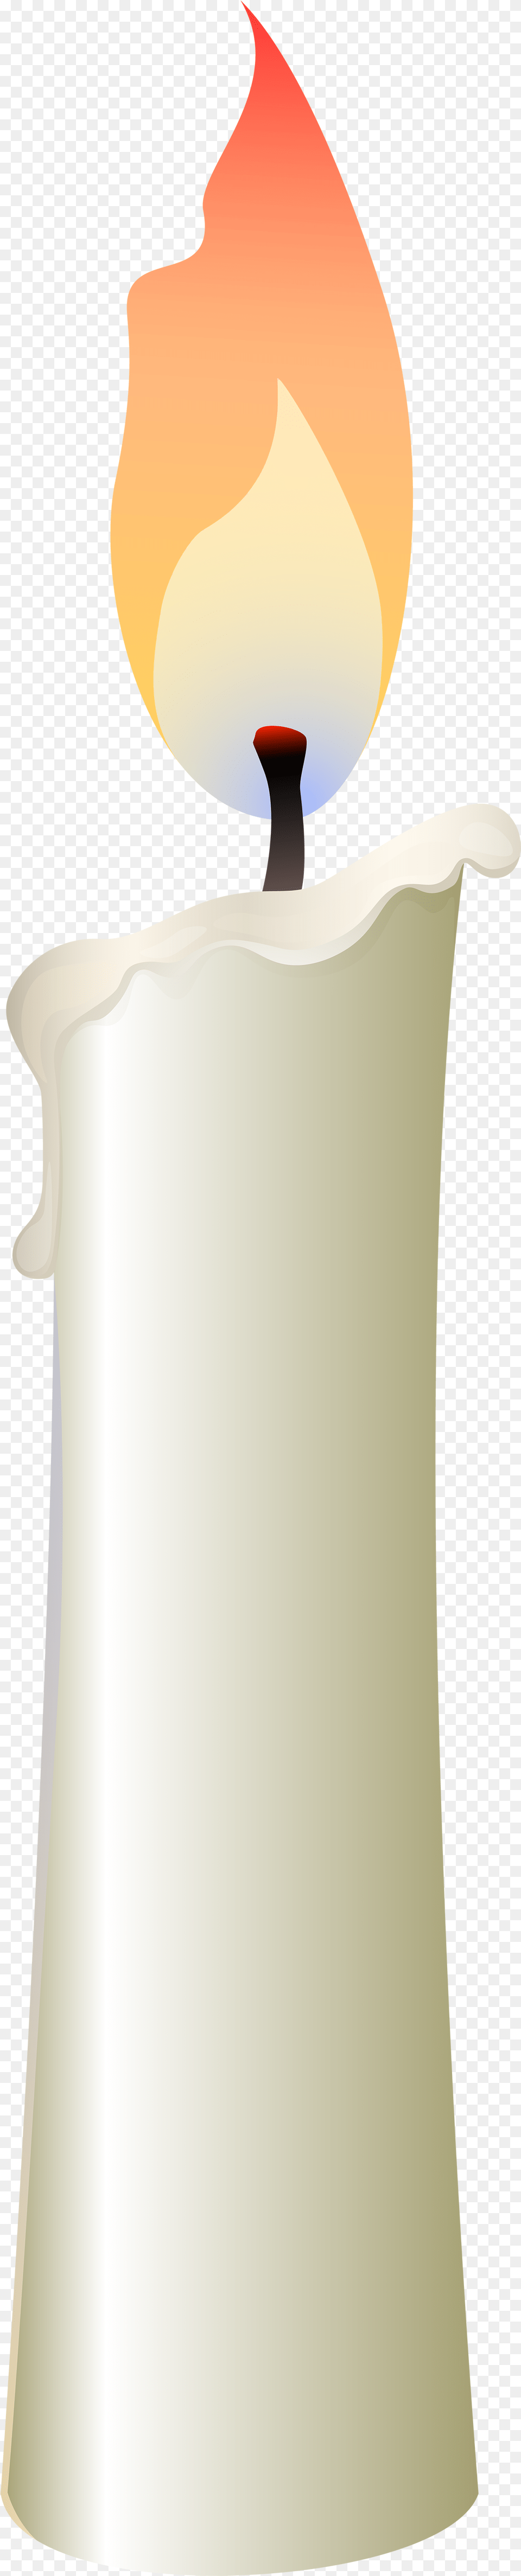 White Candle Clip Art White Candle Clipart, Fire, Flame, Bottle, Shaker Free Png